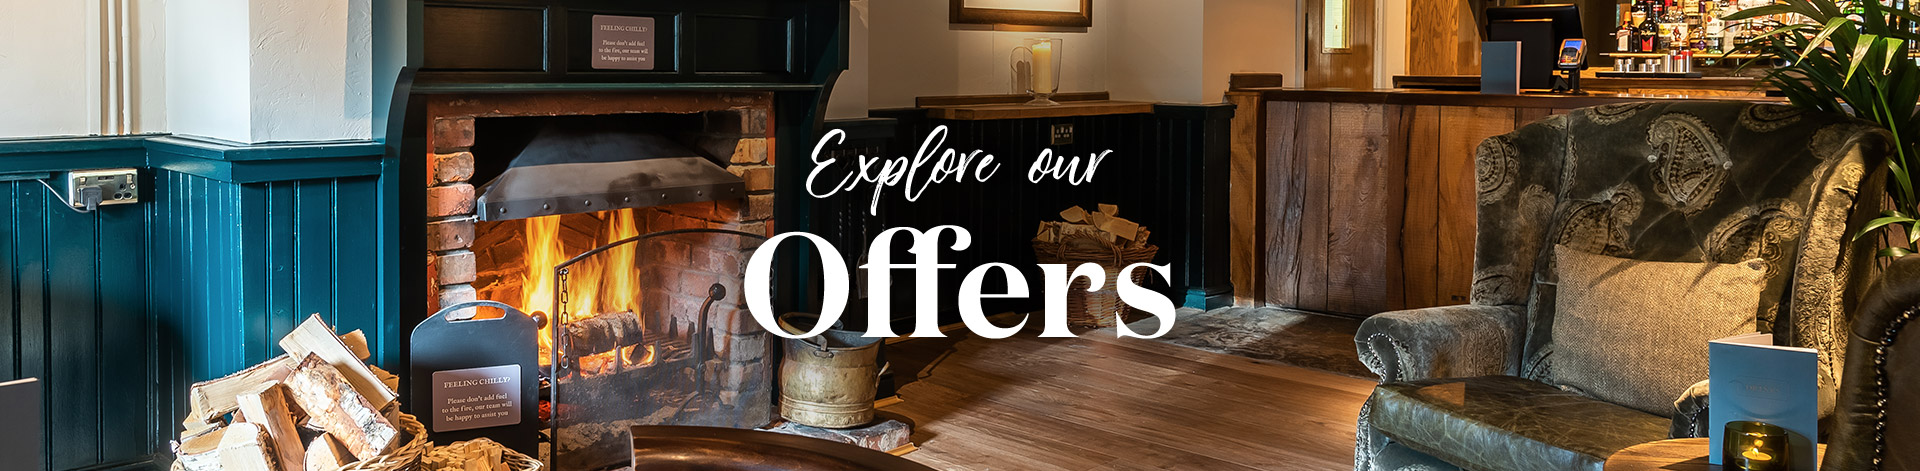 Our latest offers at The Cuckoo